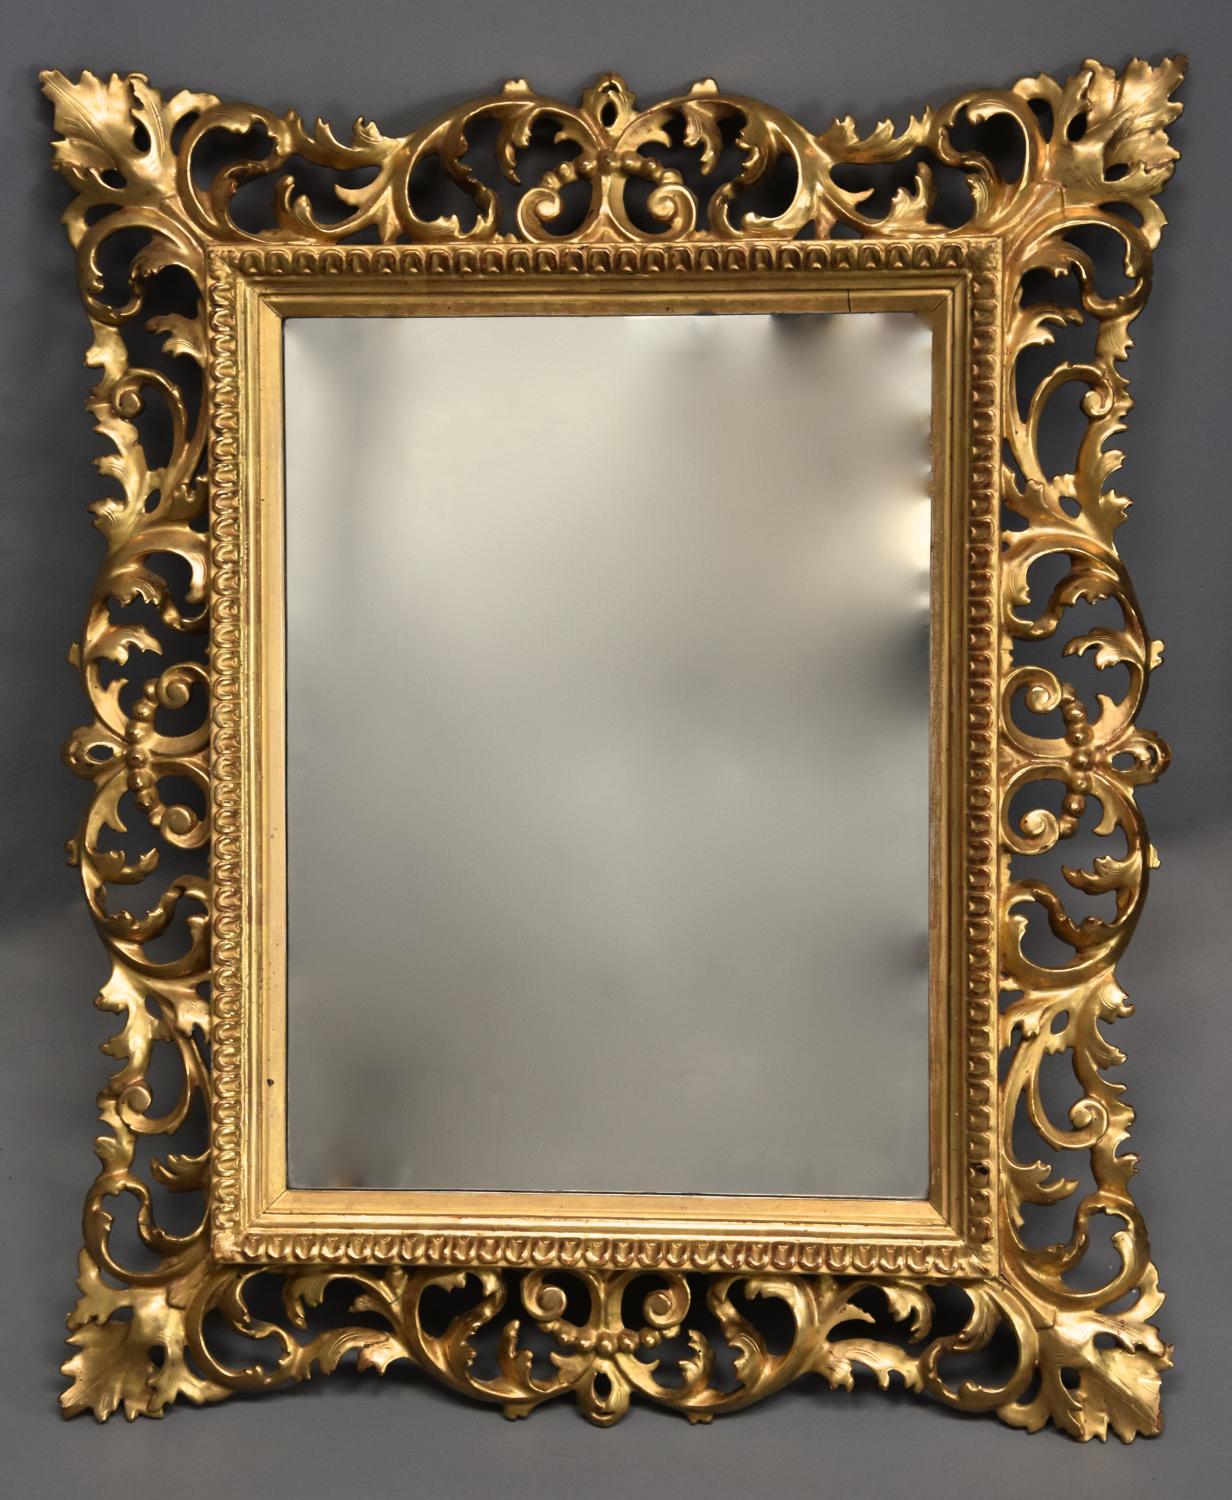 Late 19th century fine quality Florentine carved gilt wood mirror